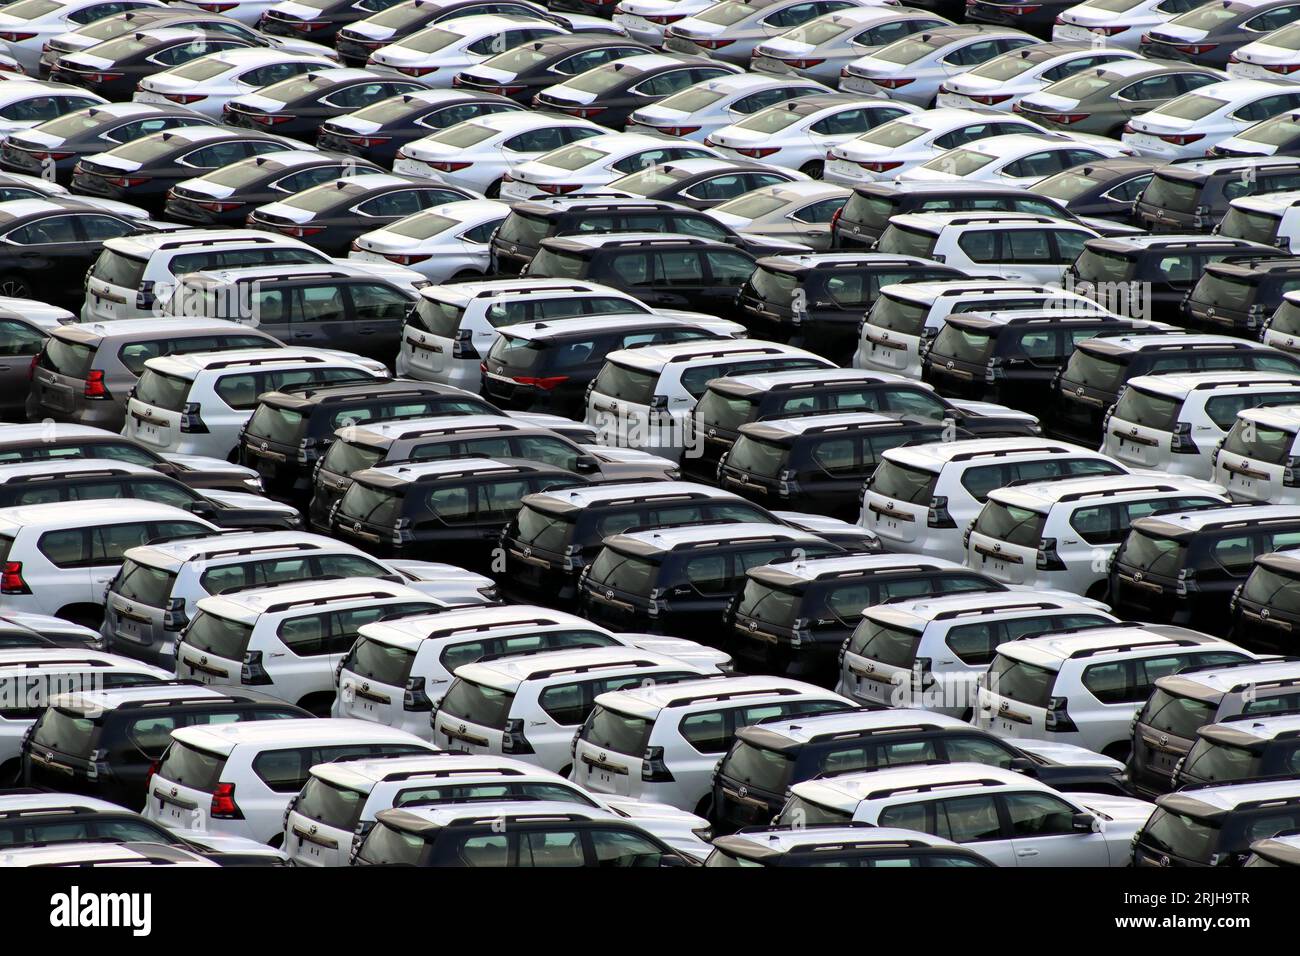 Visual gridlock formed by over 600 Toyota Land Cruiser Prado SUVs in vehicle storage at Zeebrugge harbour awaiting UK and European distribution. Stock Photo